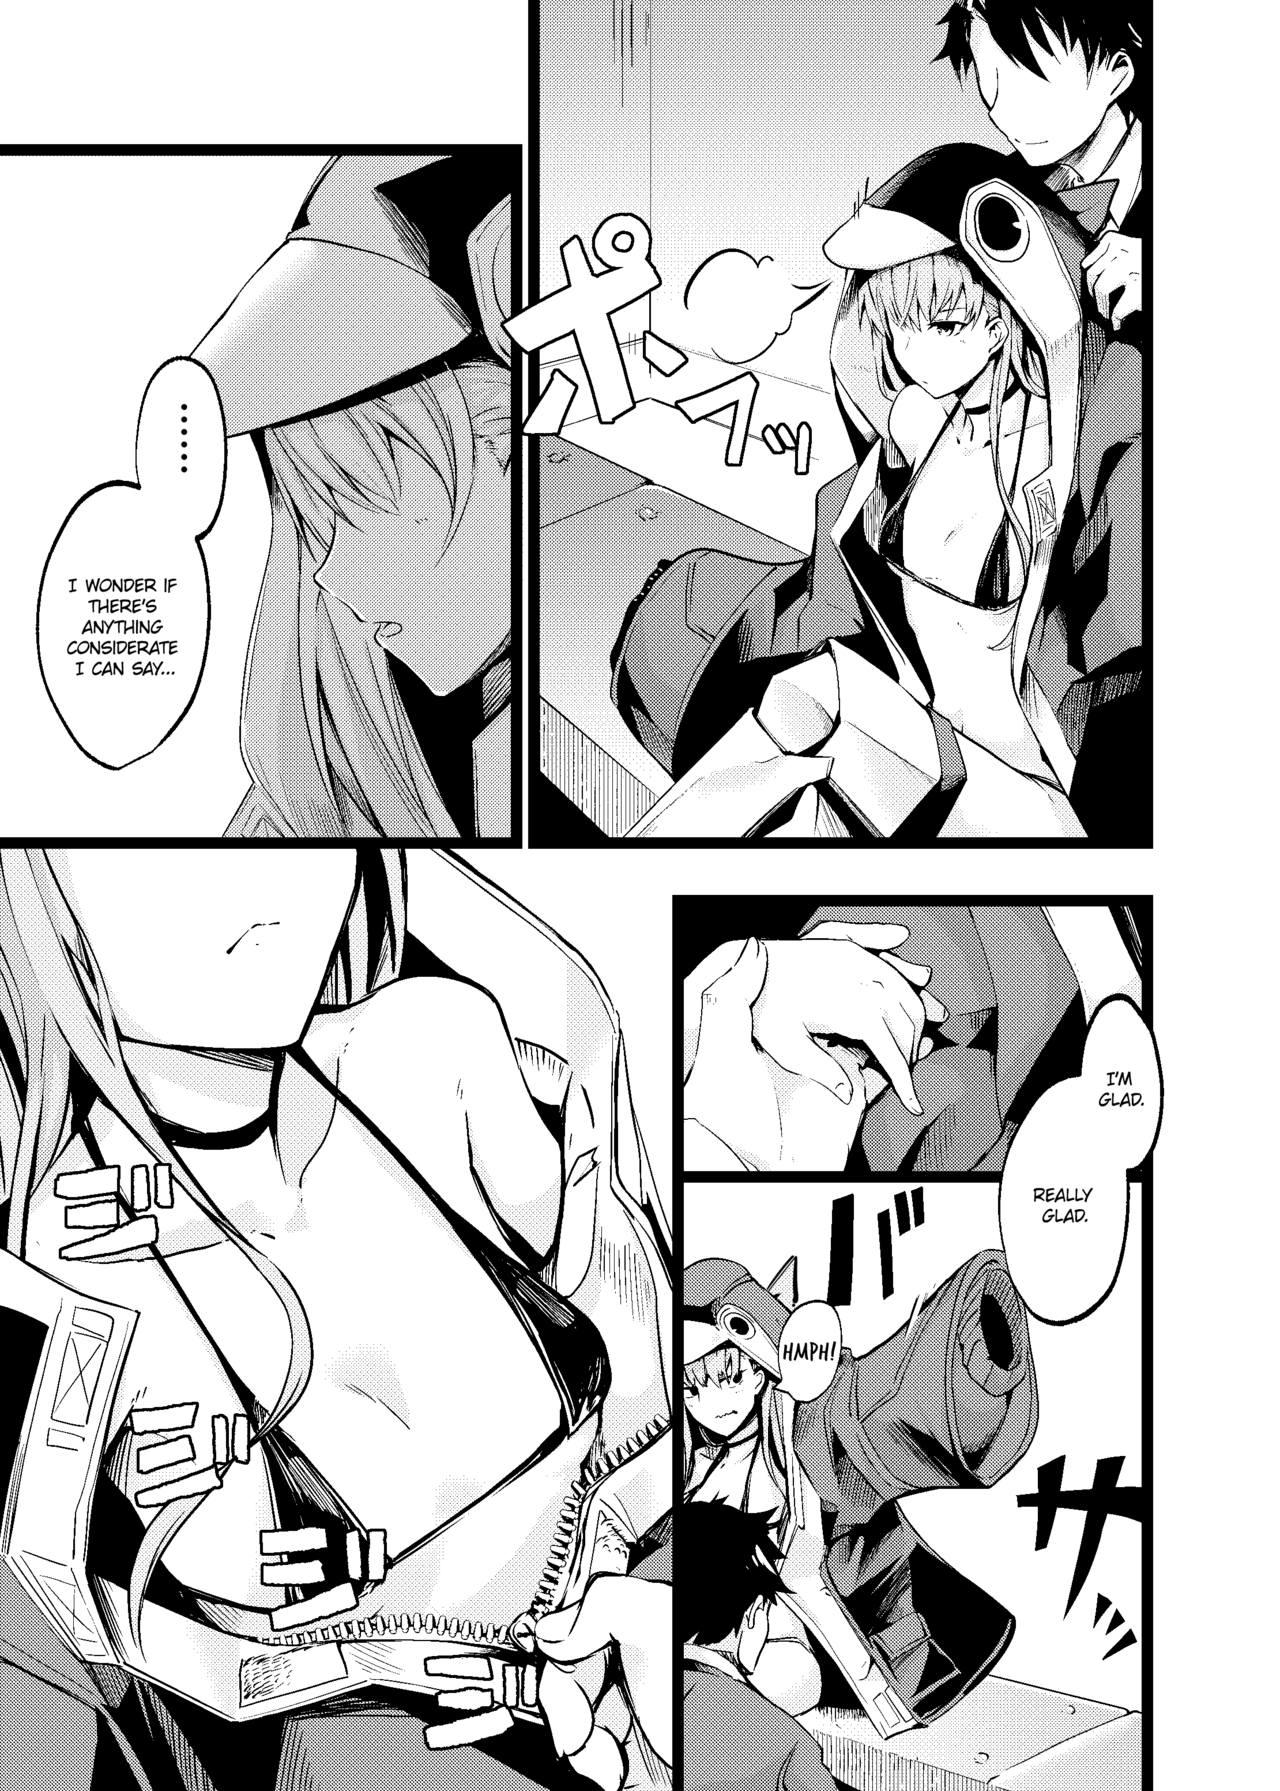 Wrestling Doing it with Meltryllis in her Swimsuit - Fate grand order Weird - Page 4